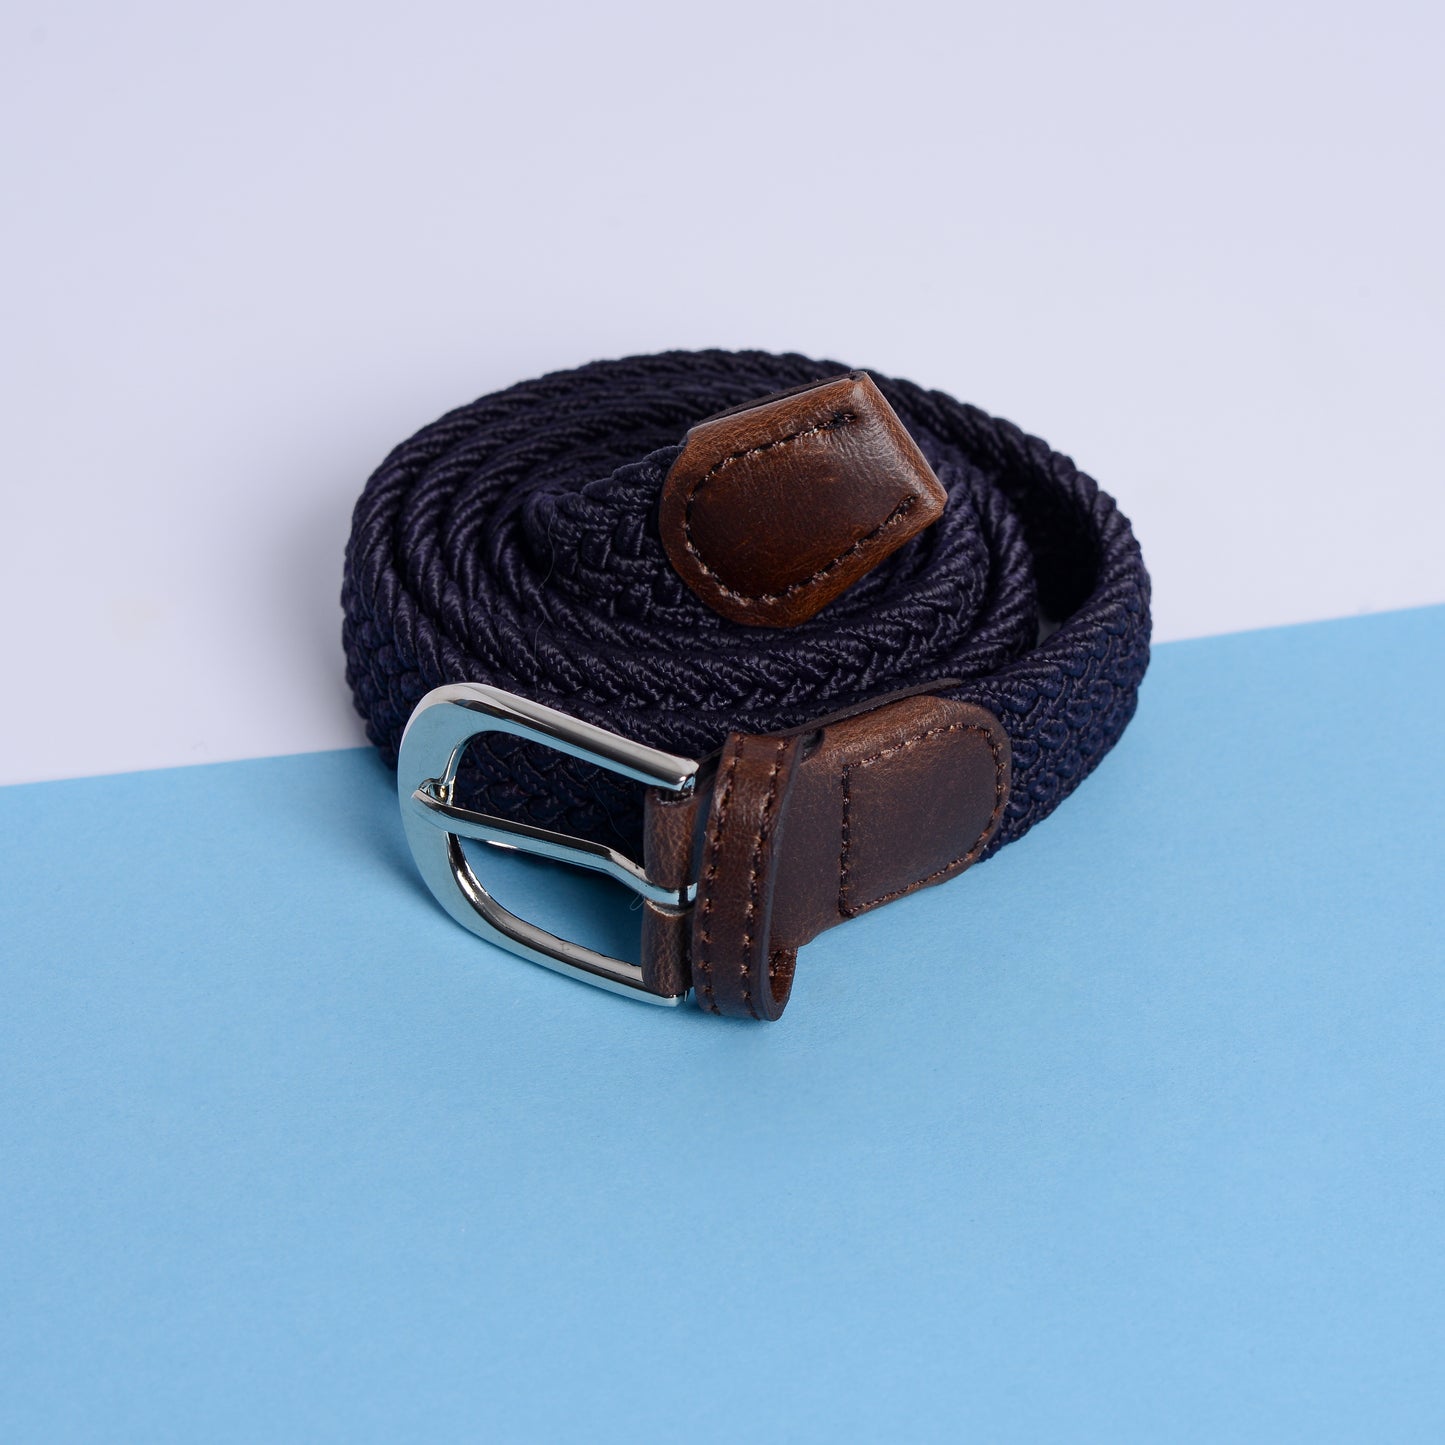 Children's Woven Stretch Belt in Navy with Brown Tab